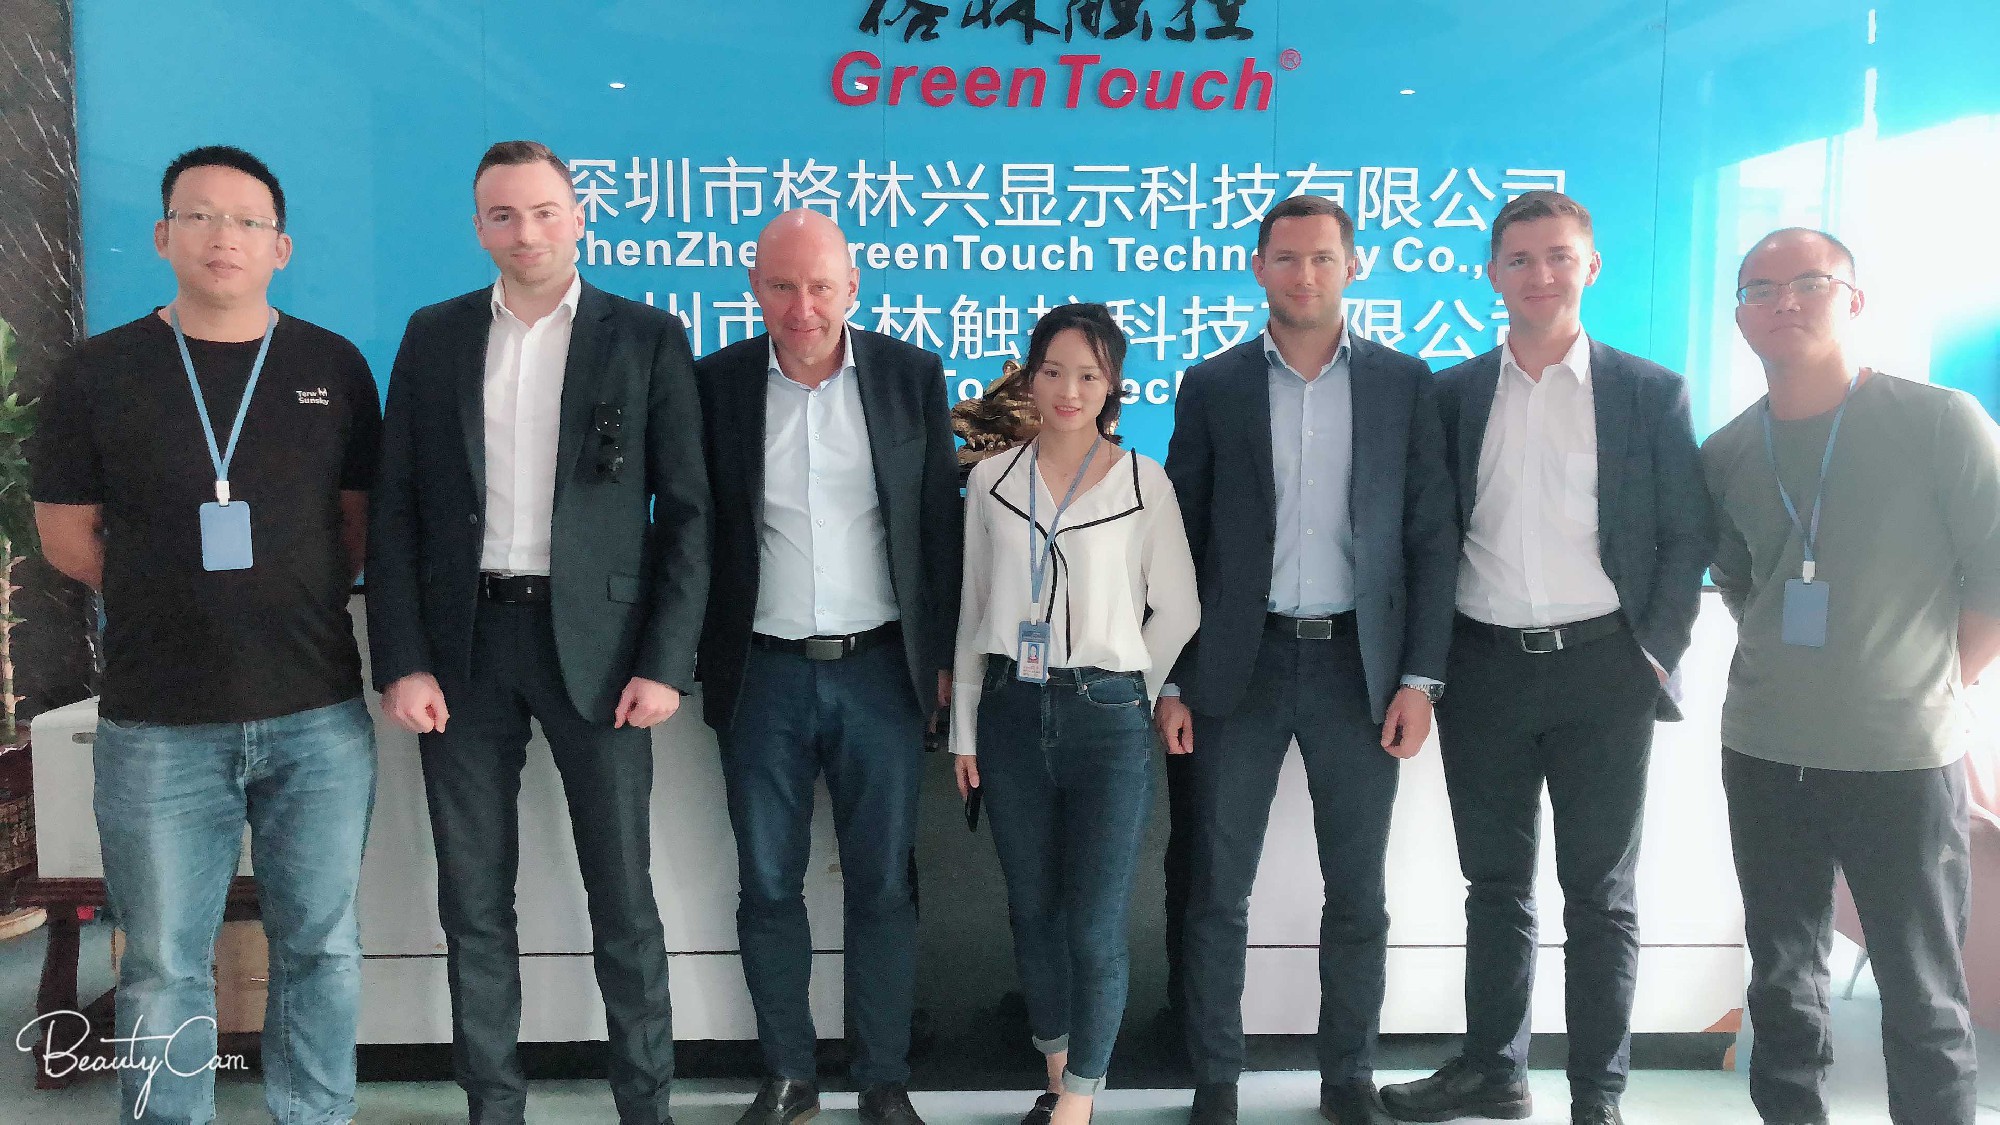 In July 2019, Polish customers visited our company to discuss business and visit and guide